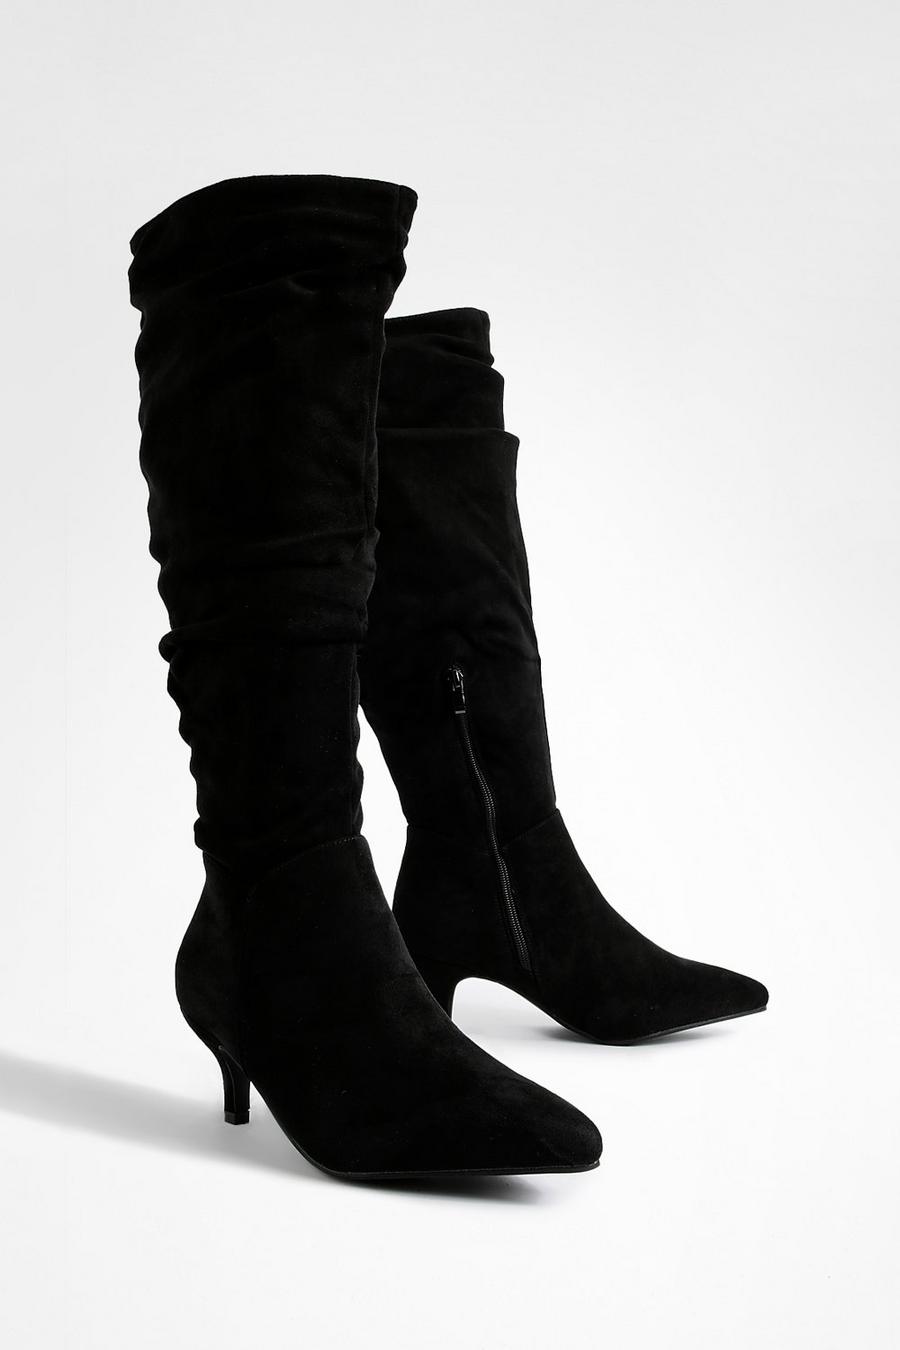 Black Low Stiletto Knee High Slouchy Boots